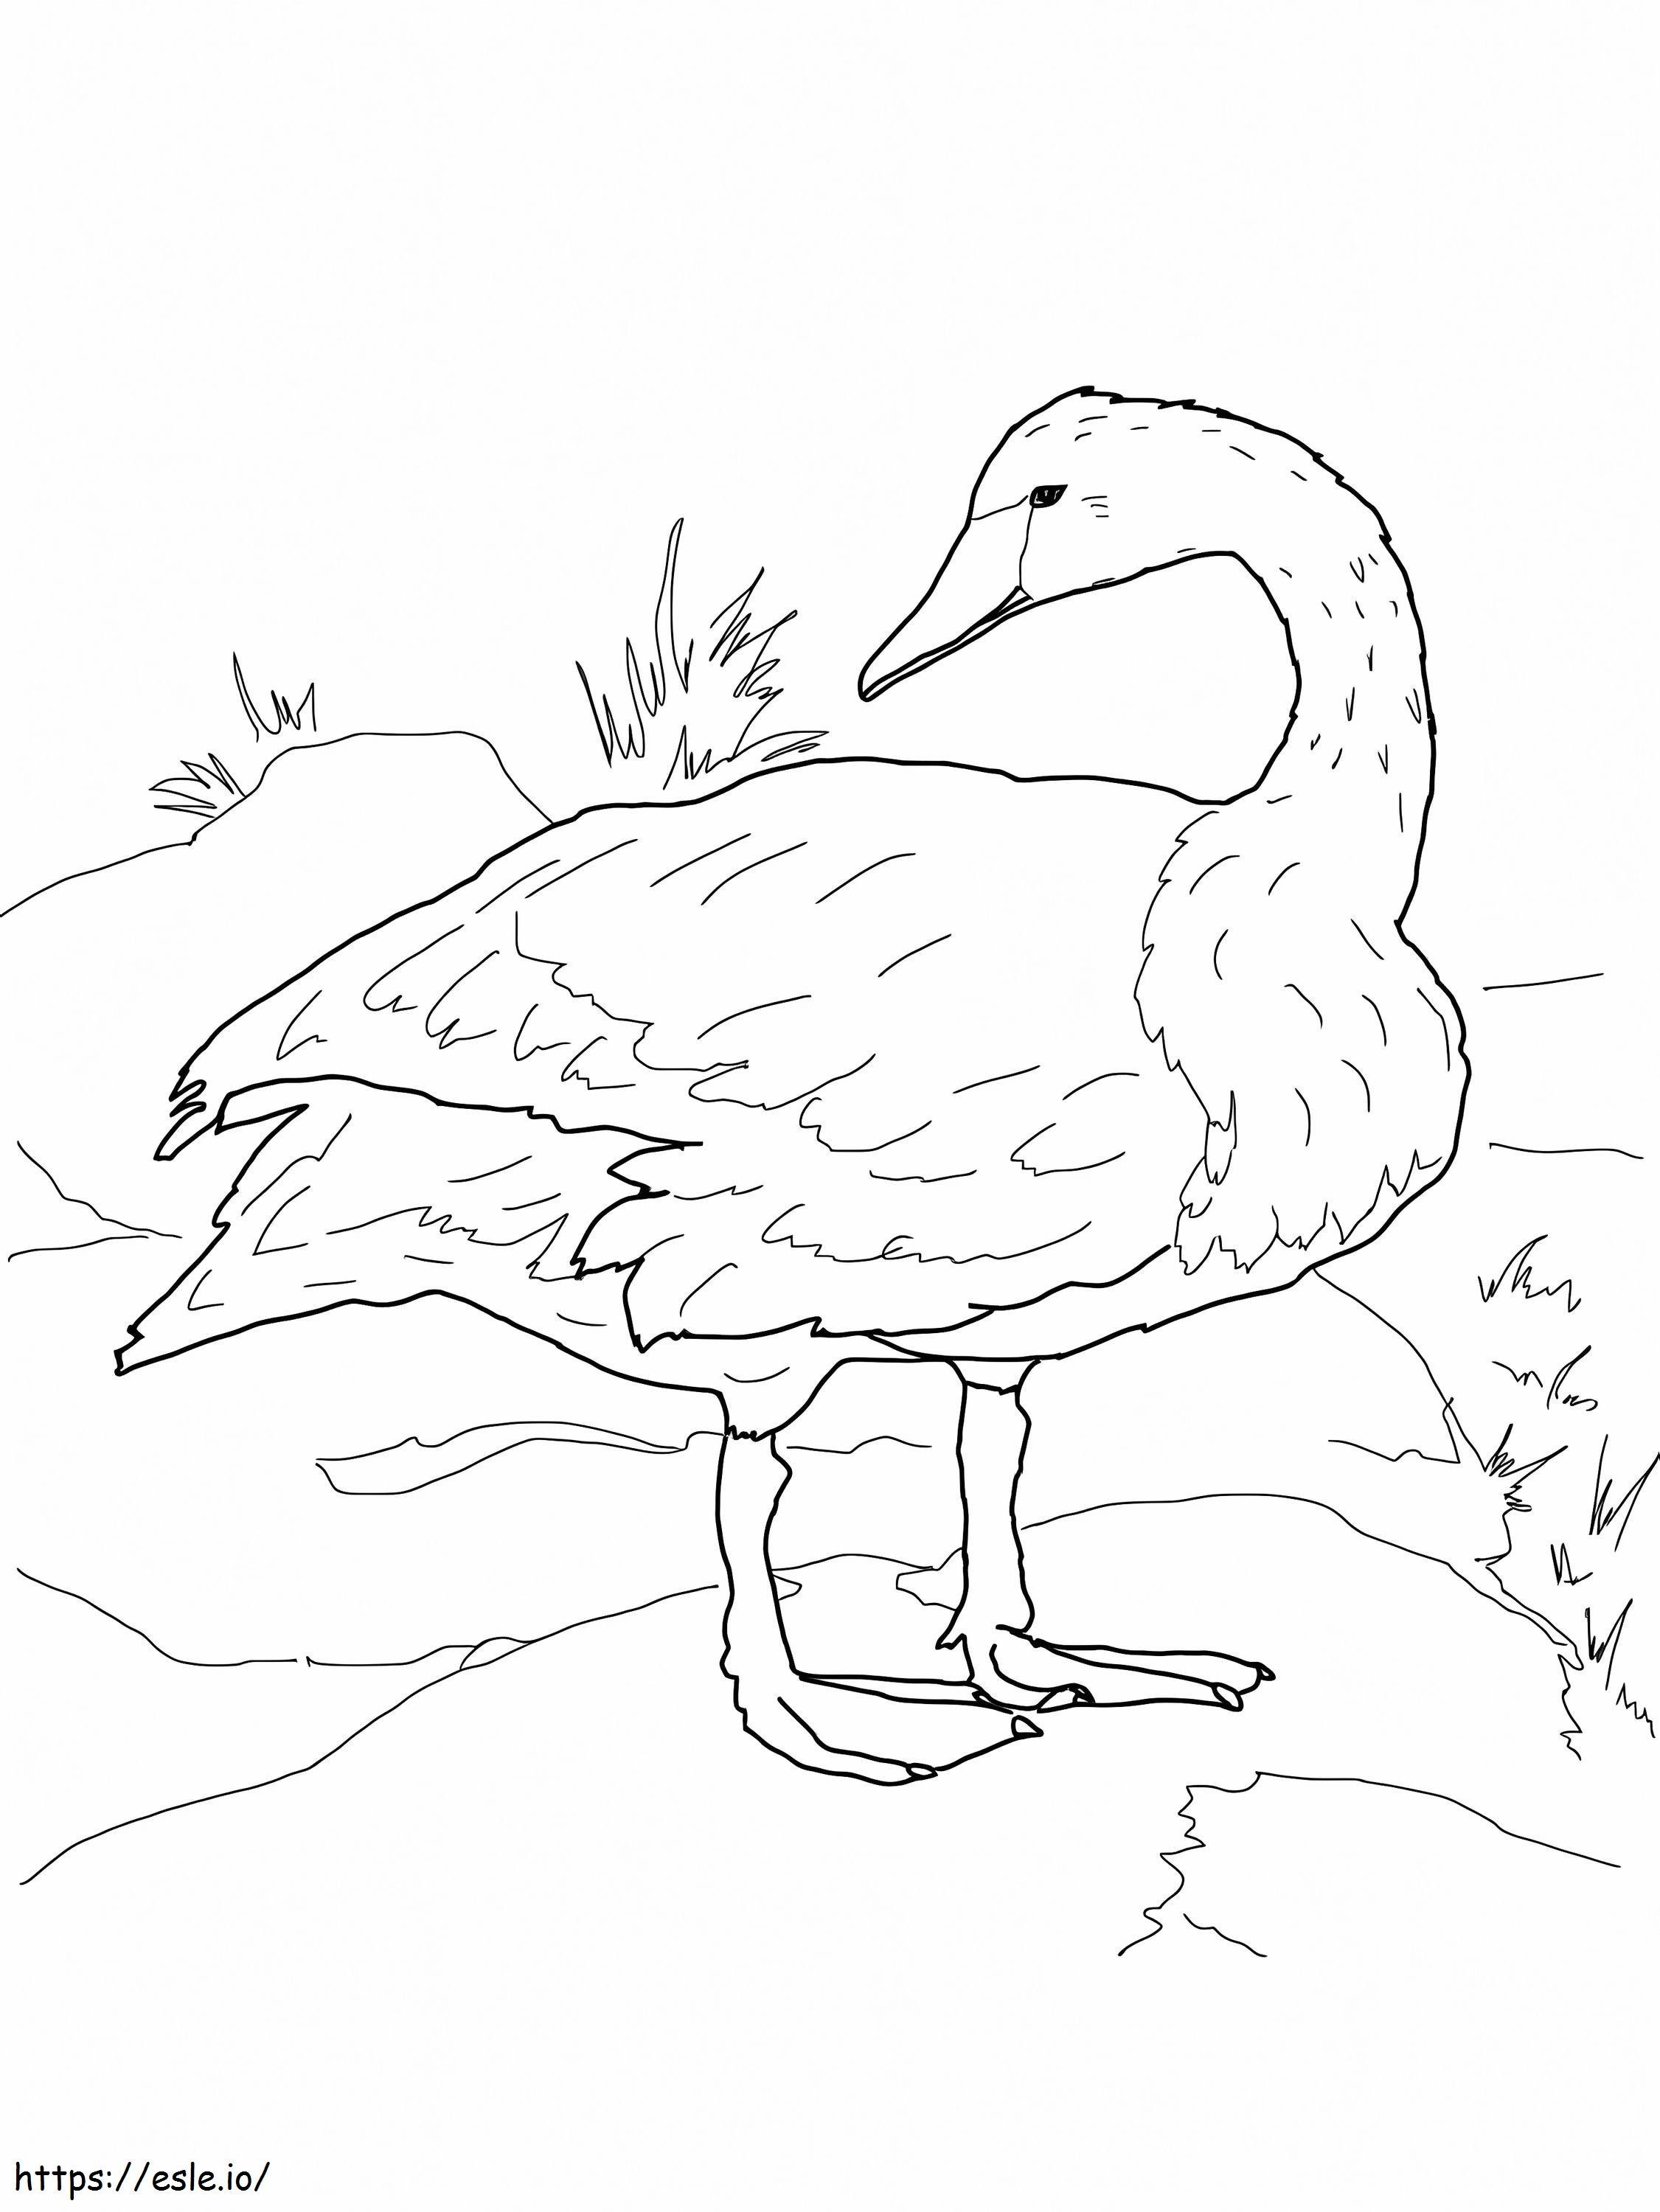 Trumpeter Swan On Shore coloring page